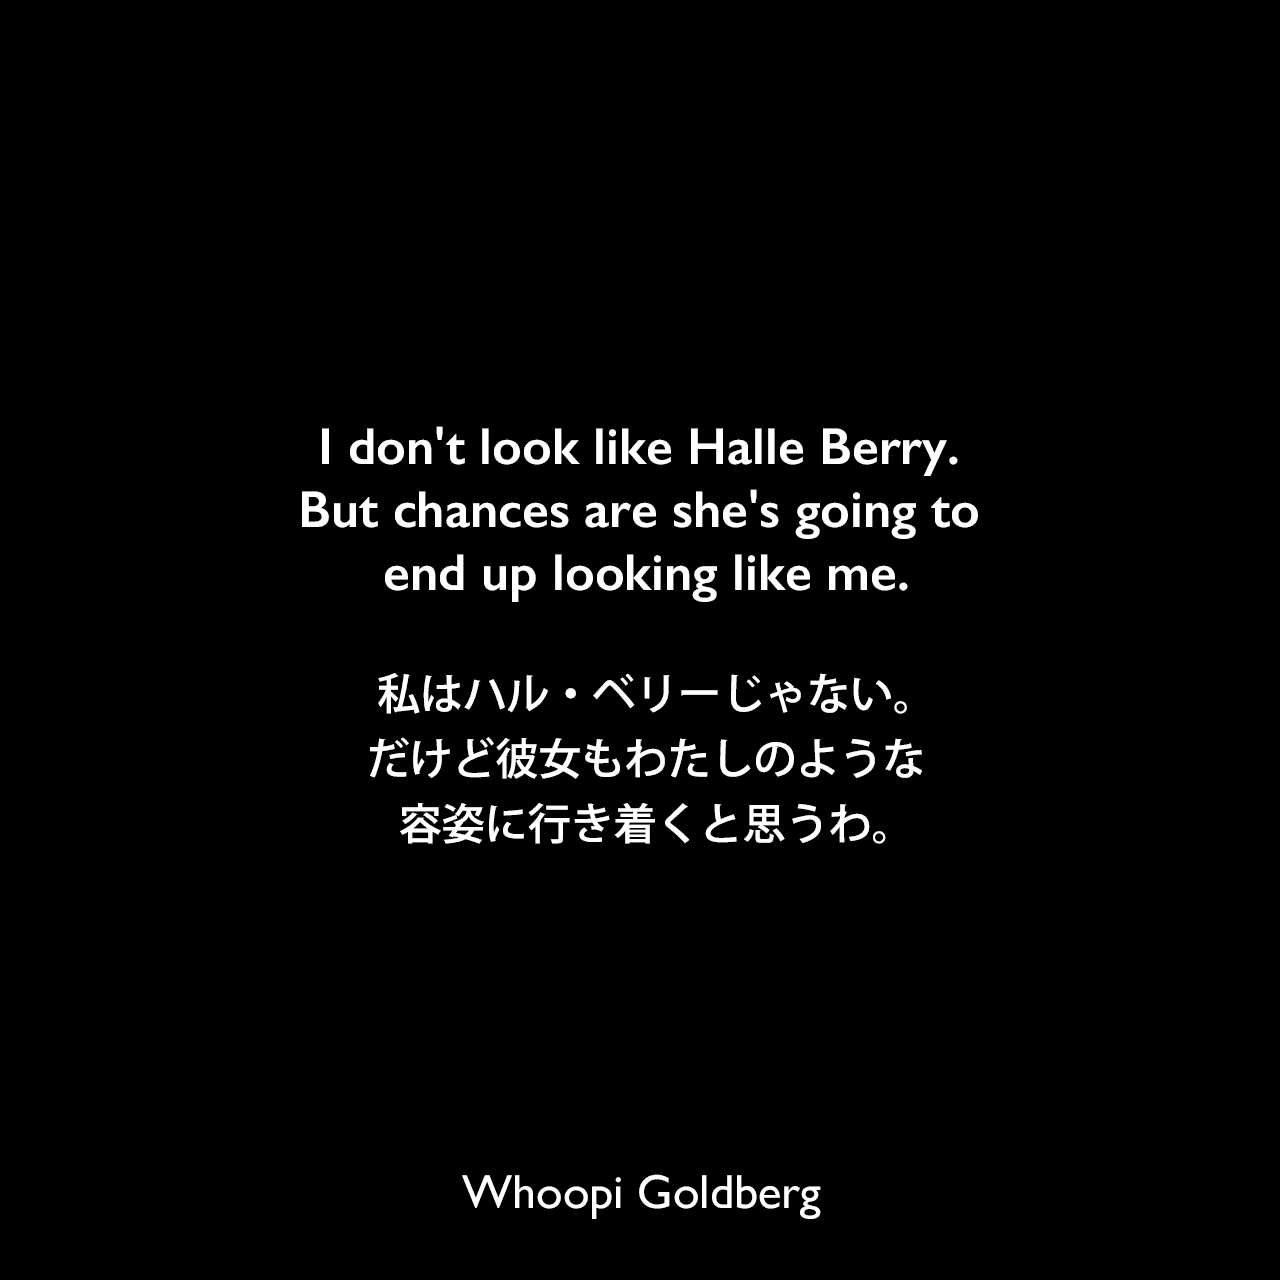 I don't look like Halle Berry. But chances are she's going to end up looking like me.私はハル・ベリーじゃない。だけど彼女もわたしのような容姿に行き着くと思うわ。Whoopi Goldberg